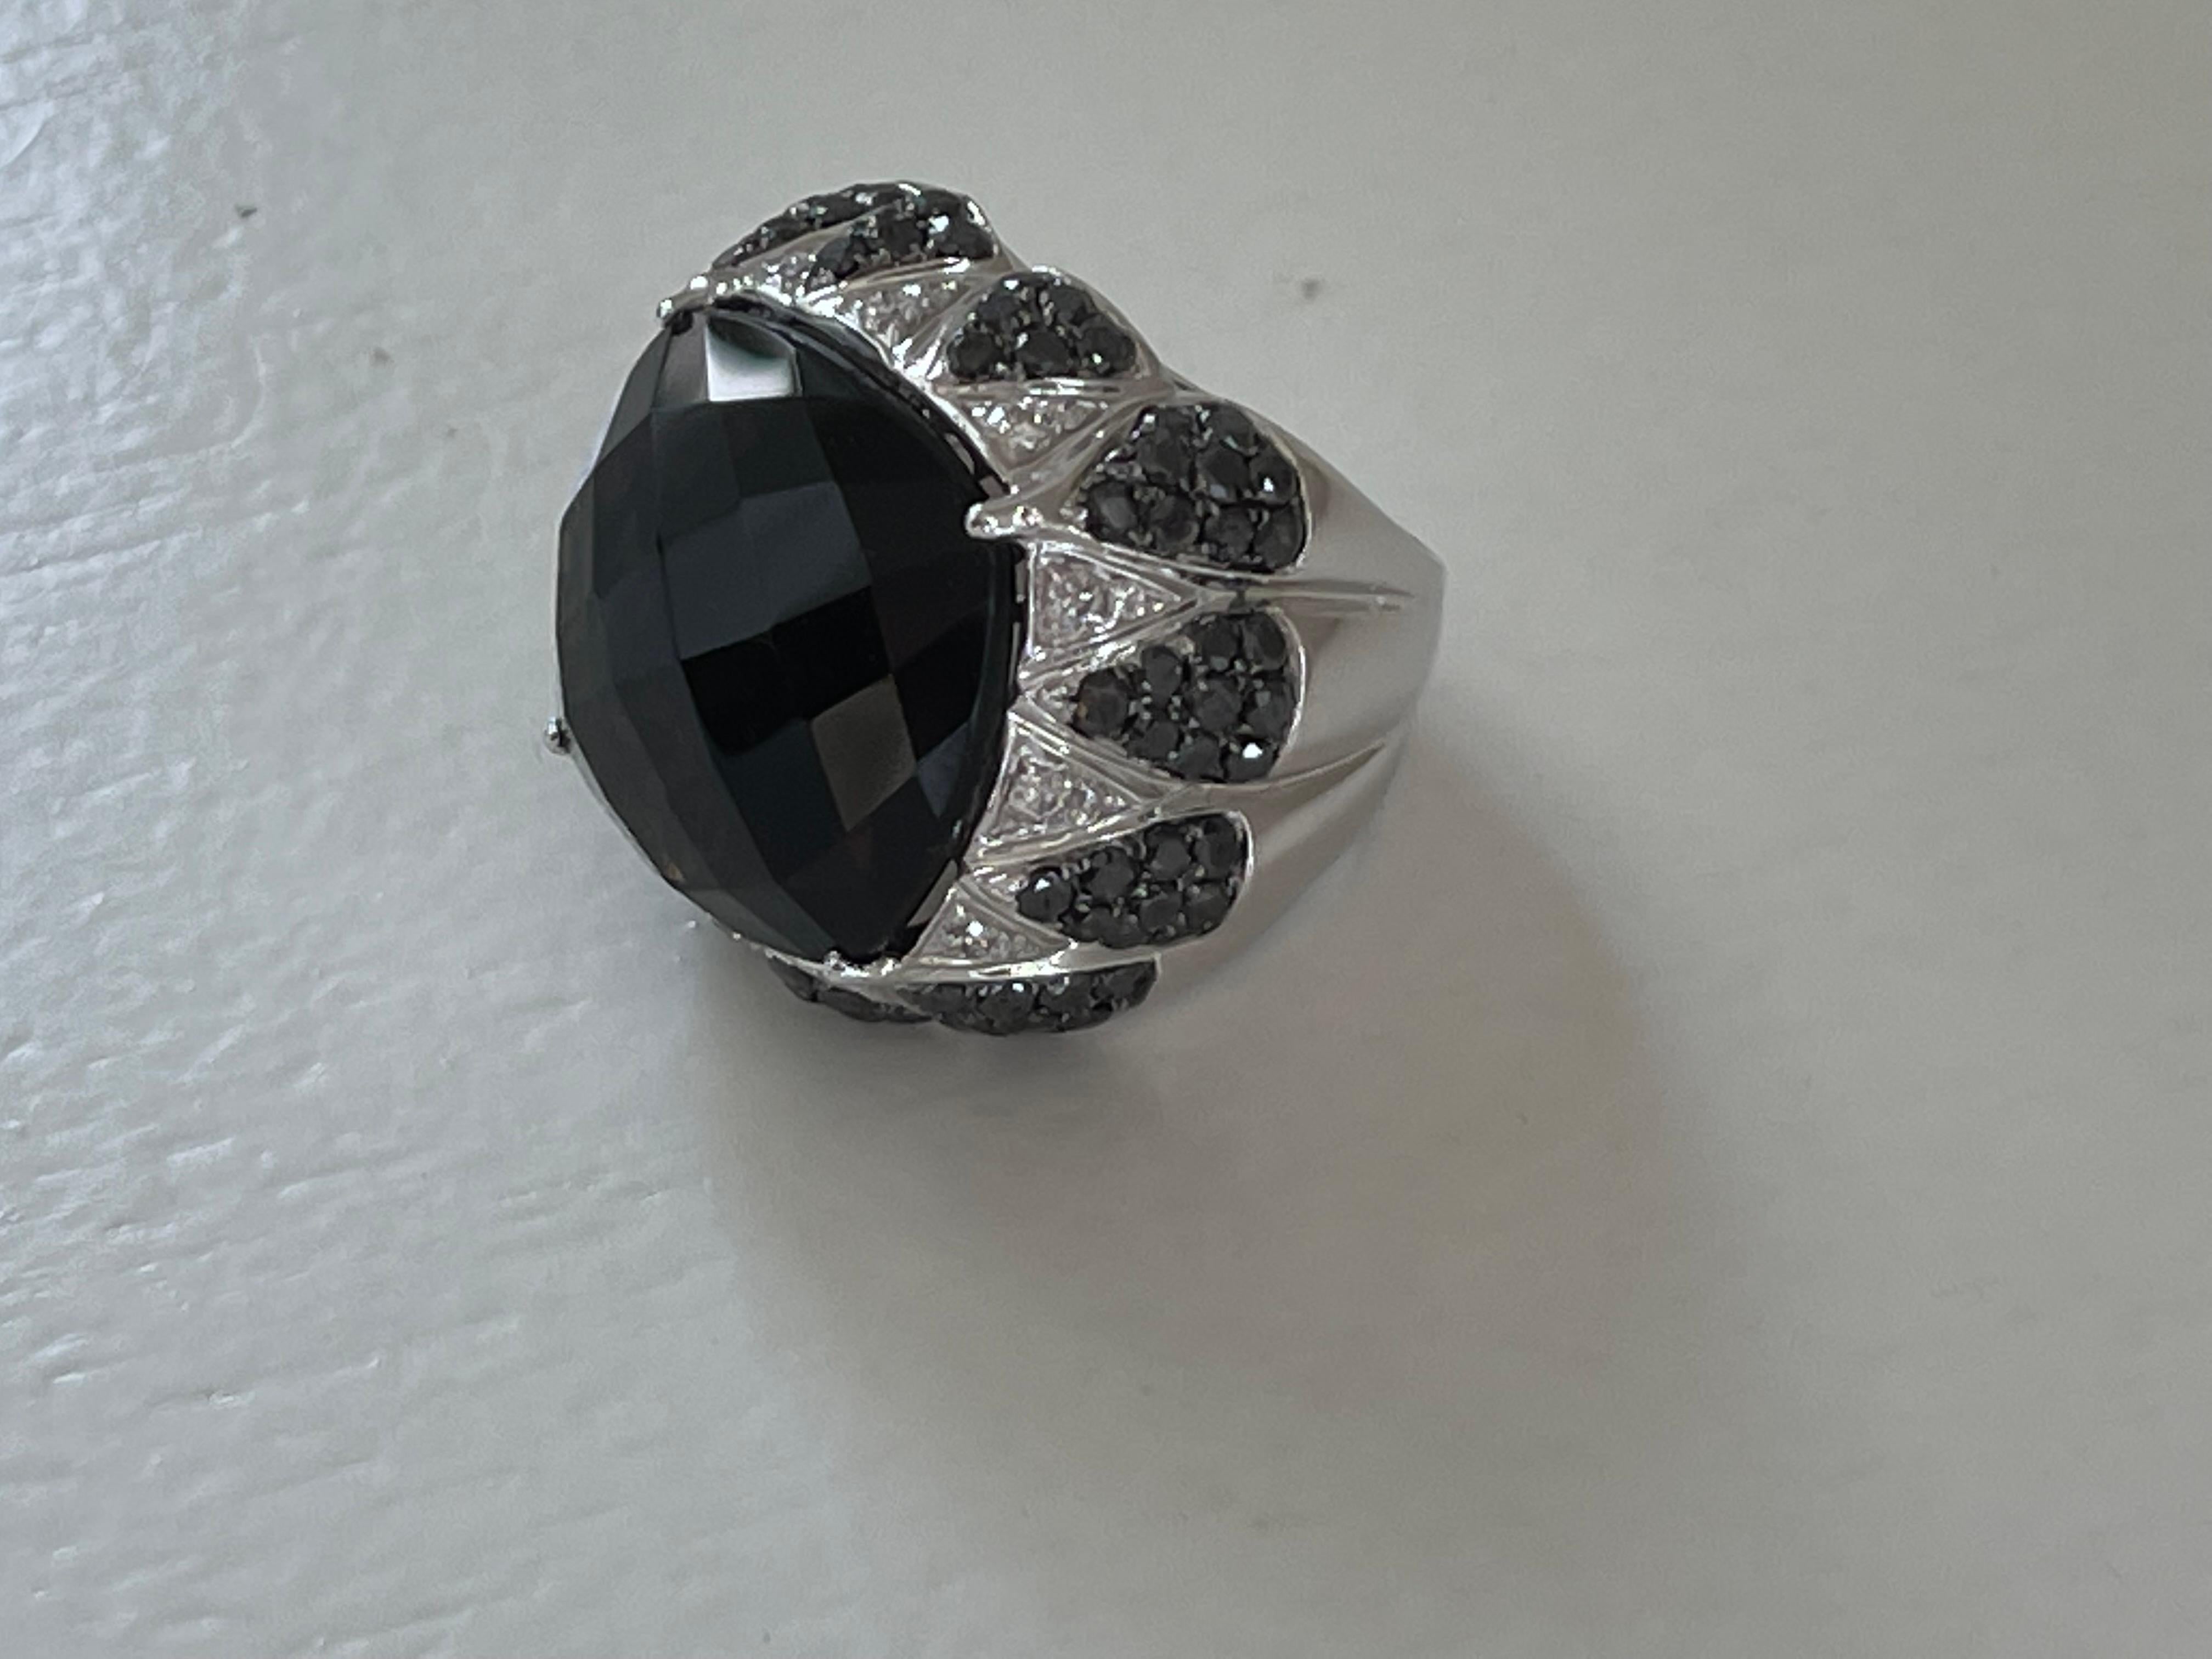 This stunning cocktail ring features a claw set single fancy cut Smoky Quartz center gemstone in a breathtaking 18k white gold setting accented with 96 black Diamonds weighing approximately 
2.30 ct and and 24 white Diamonds weighing 0.46 ct. A real